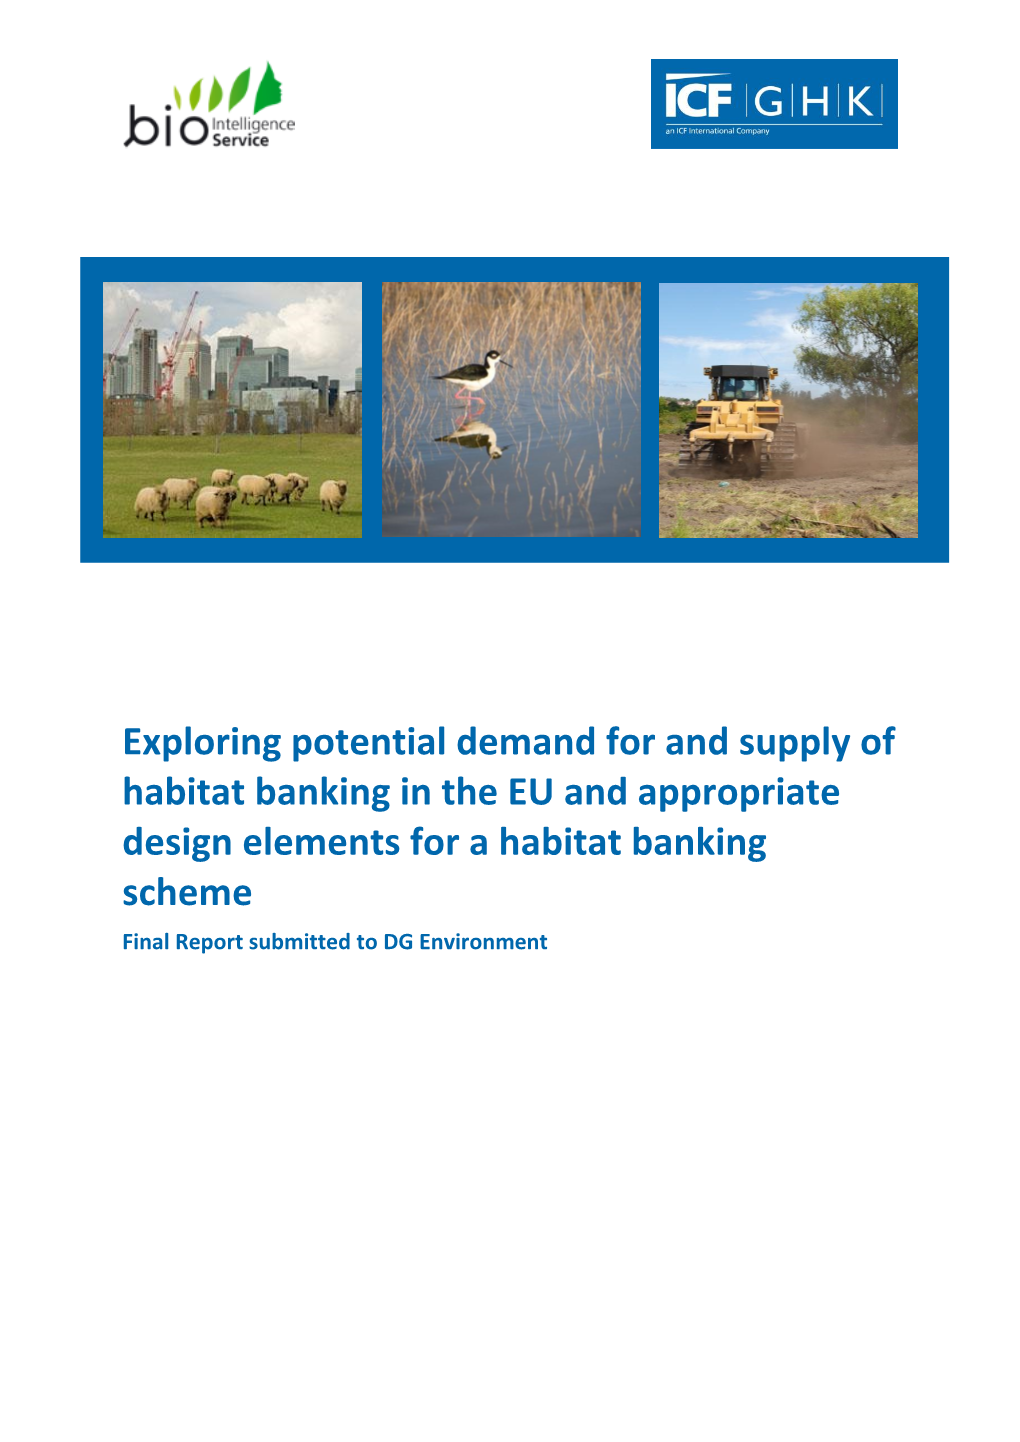 Exploring Potential Demand for and Supply of Habitat Banking in the EU